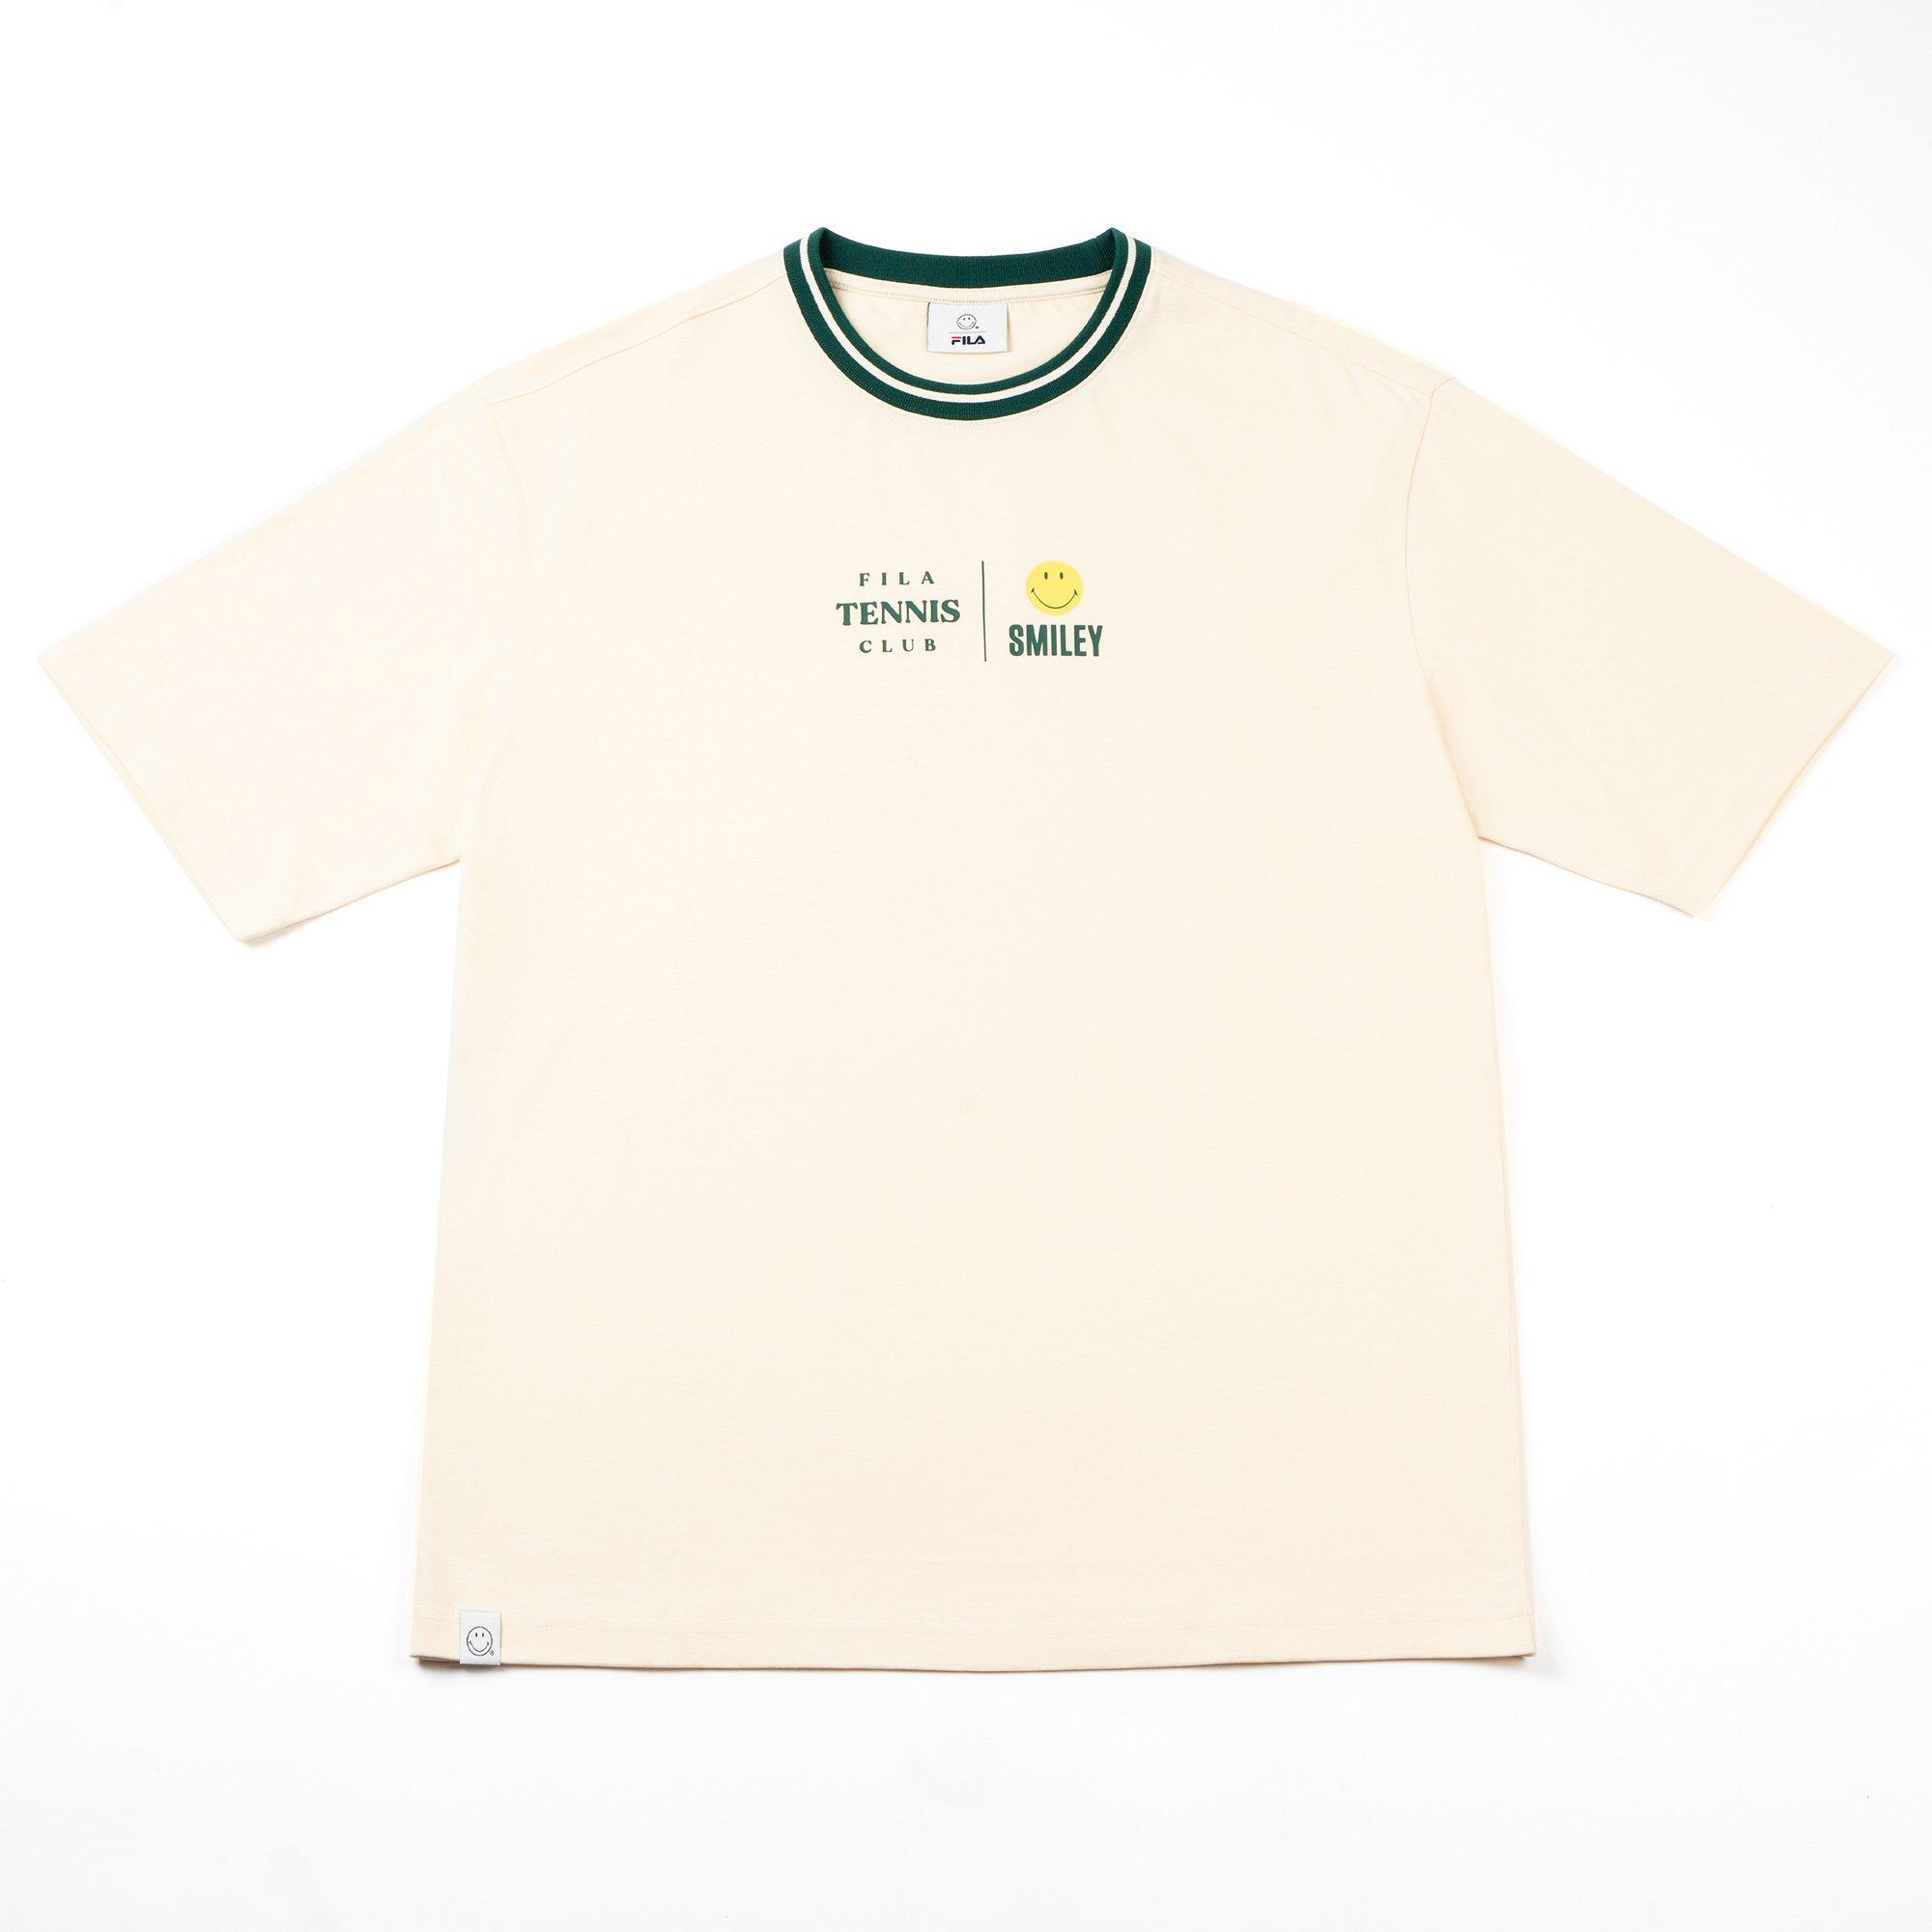 Fila | Tennis Club x Smiley Graphic Adults T Shirts | Oversized T ...